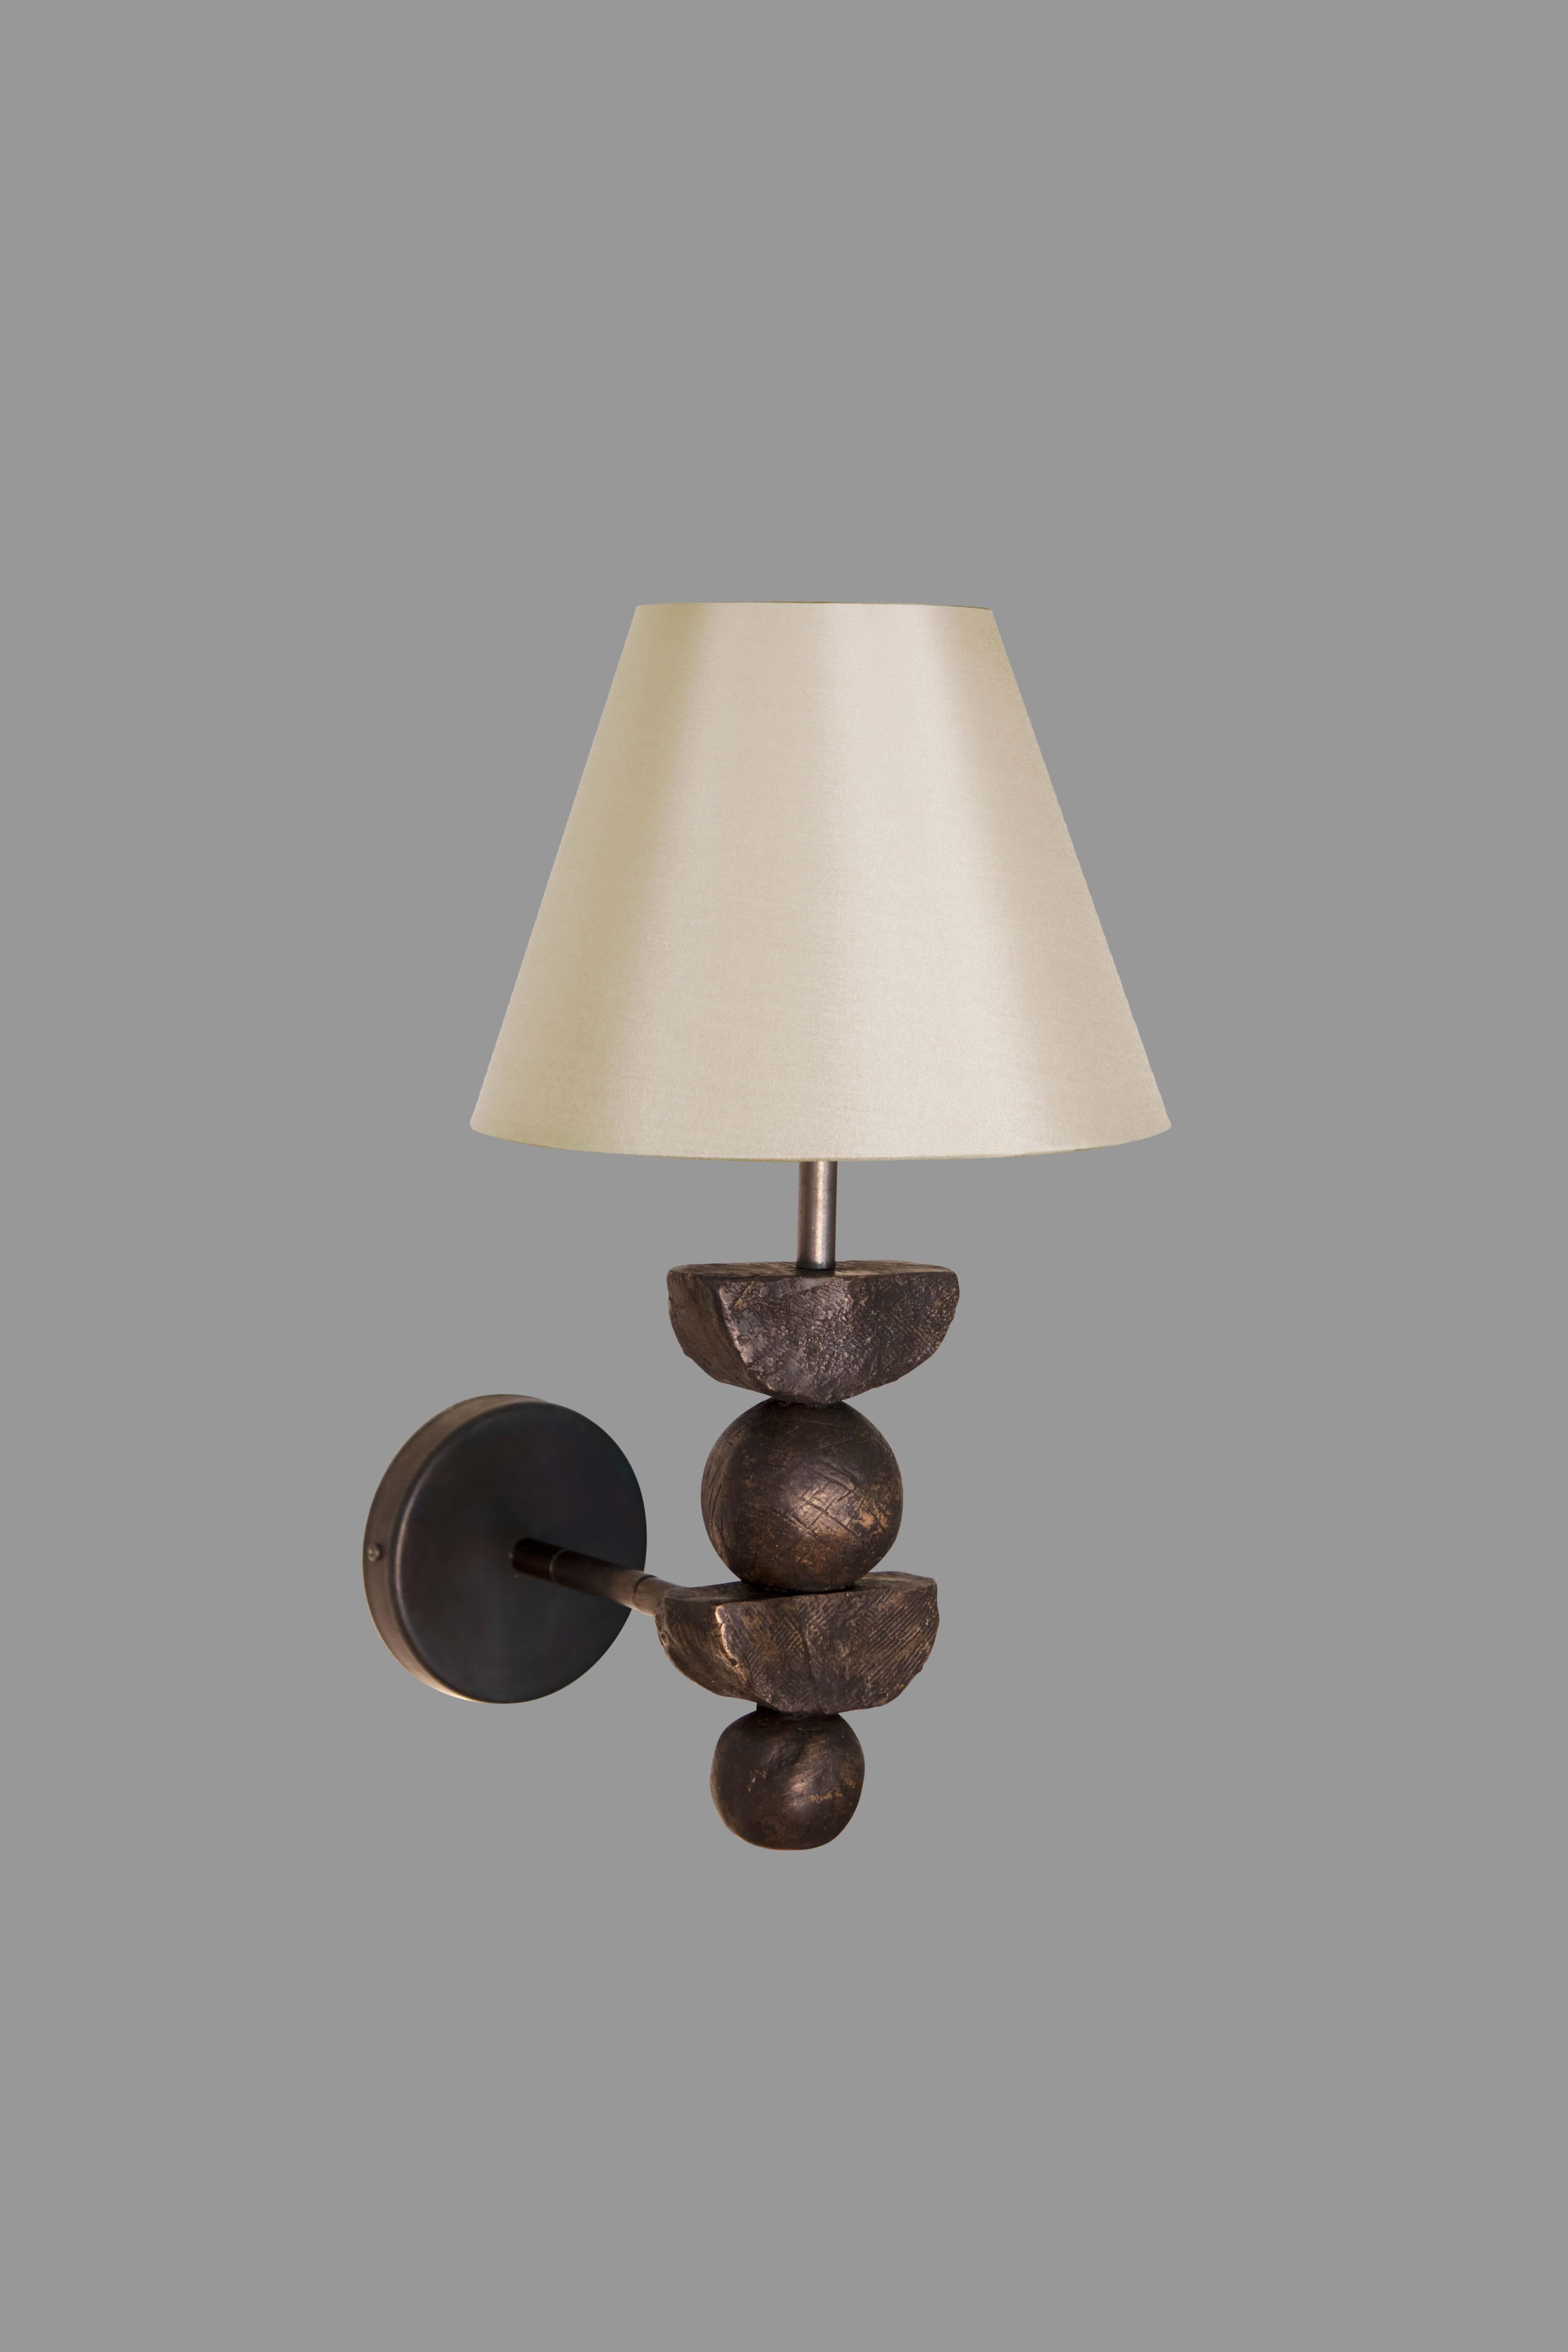 English Silhouette Sculptural Contemporary Wall Light in Bronze Color by Margit Wittig For Sale